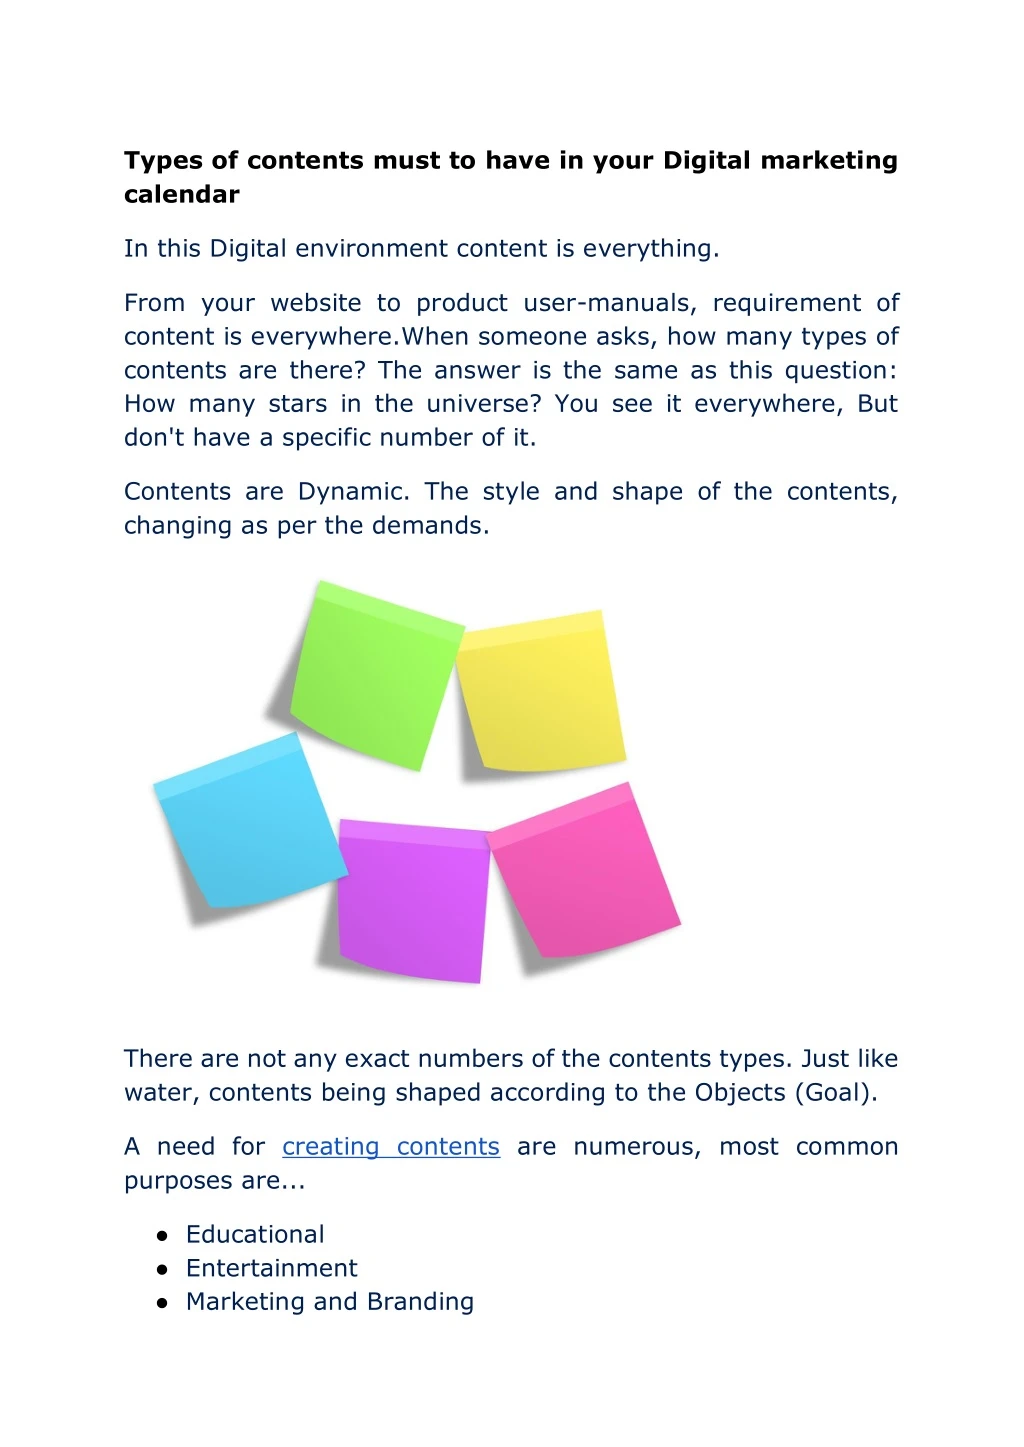 types of contents must to have in your digital